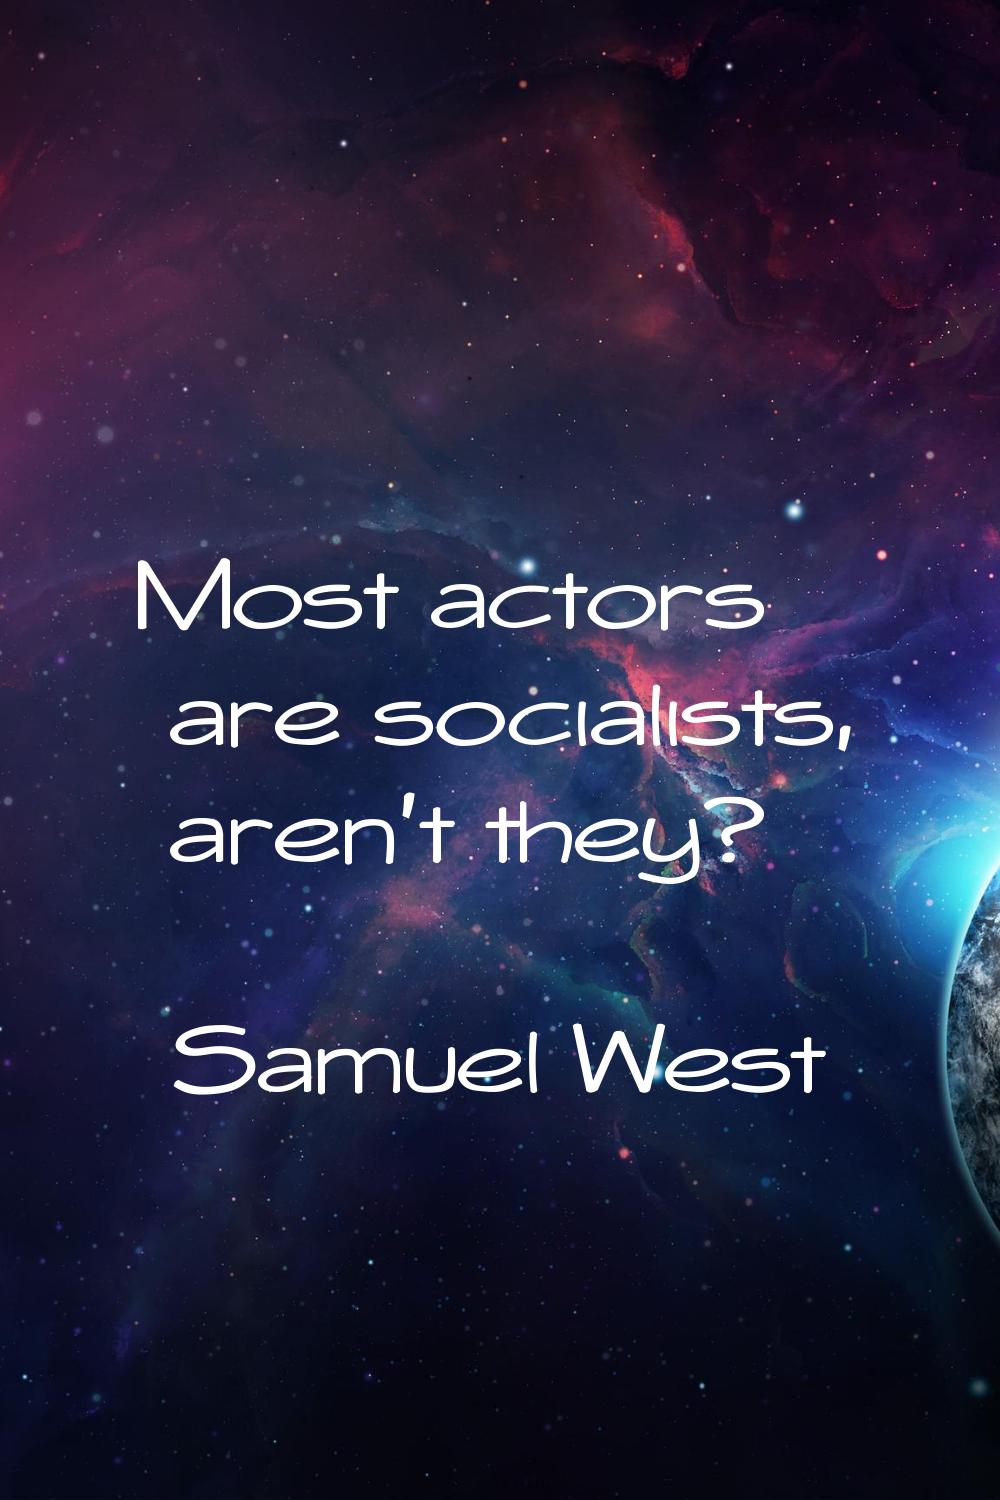 Most actors are socialists, aren't they?